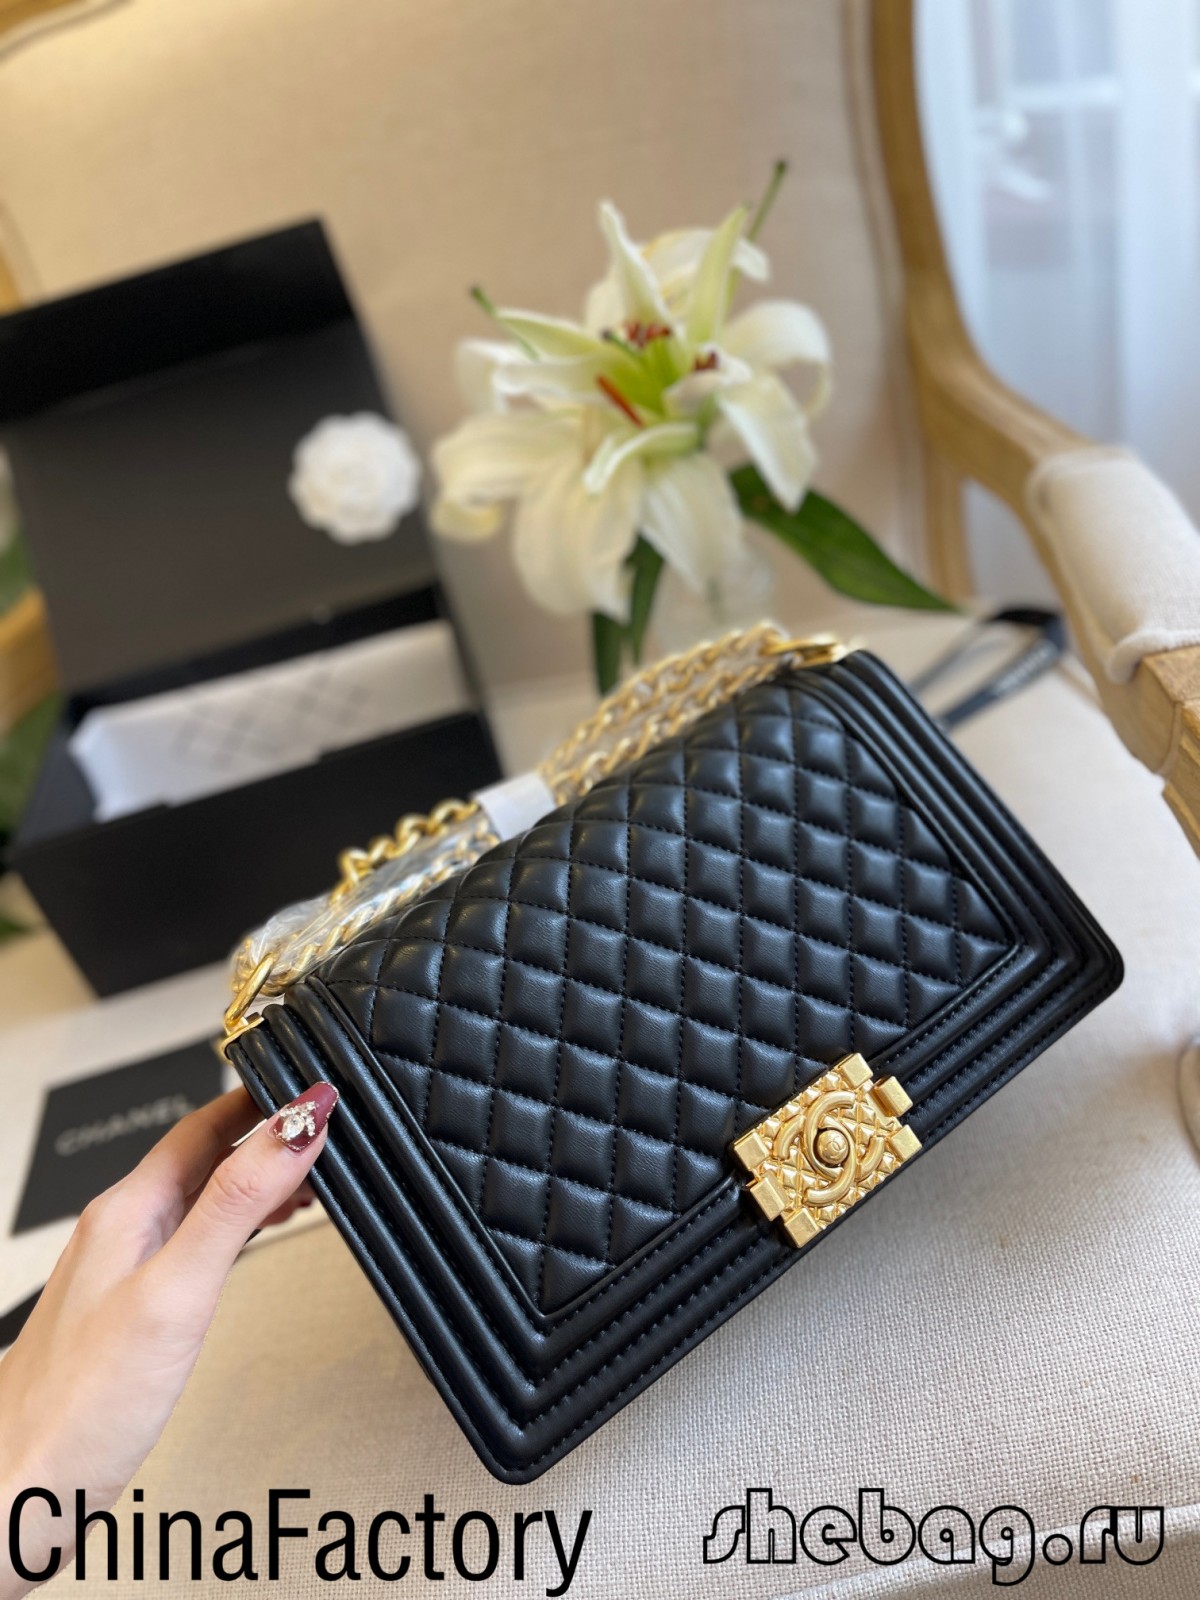 Best quality 2.55 Chanel bag replica sources in China (updated in 2022)-Best Quality Fake designer Bag Review, Replica designer bag ru